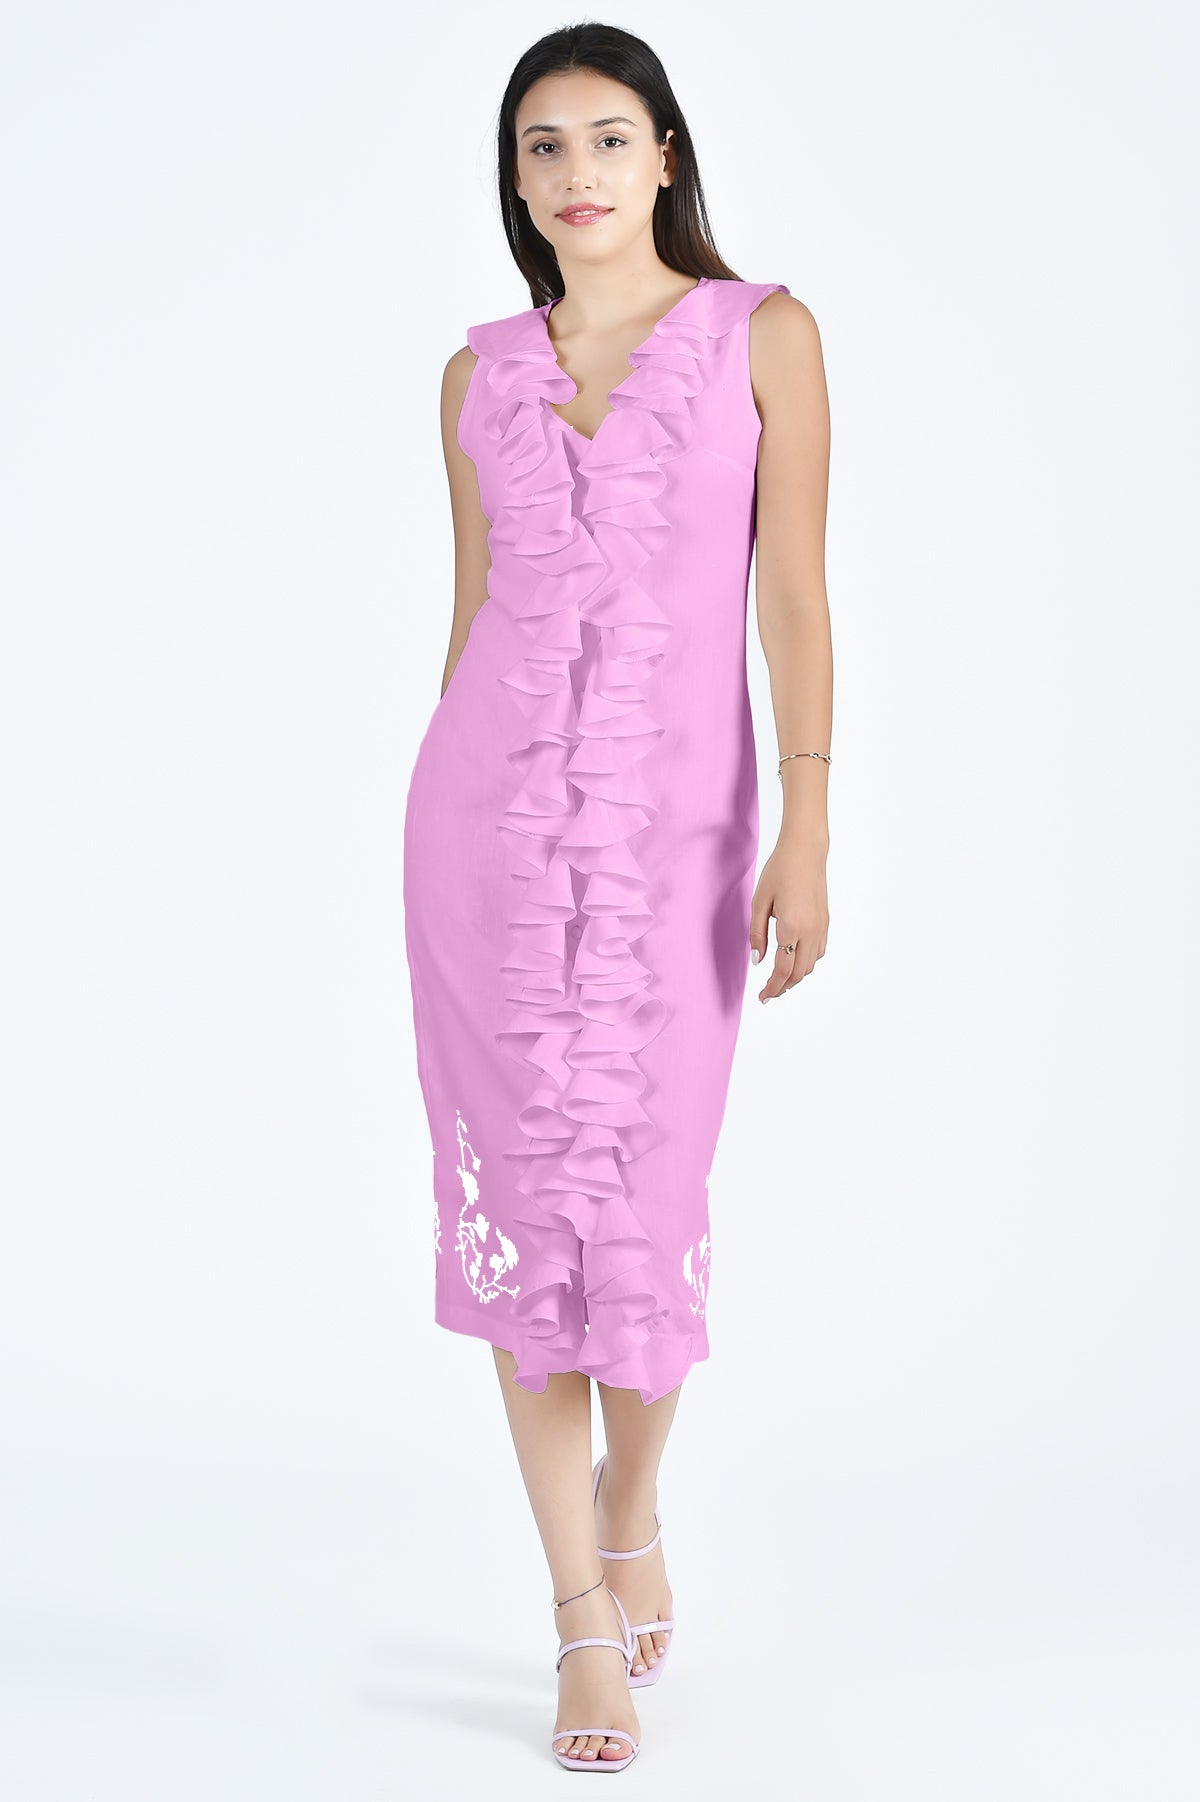 Fanm Mon Belinda Dress in Plum with Ruffle Front and White Floral Embroidery (Wombman Collection)